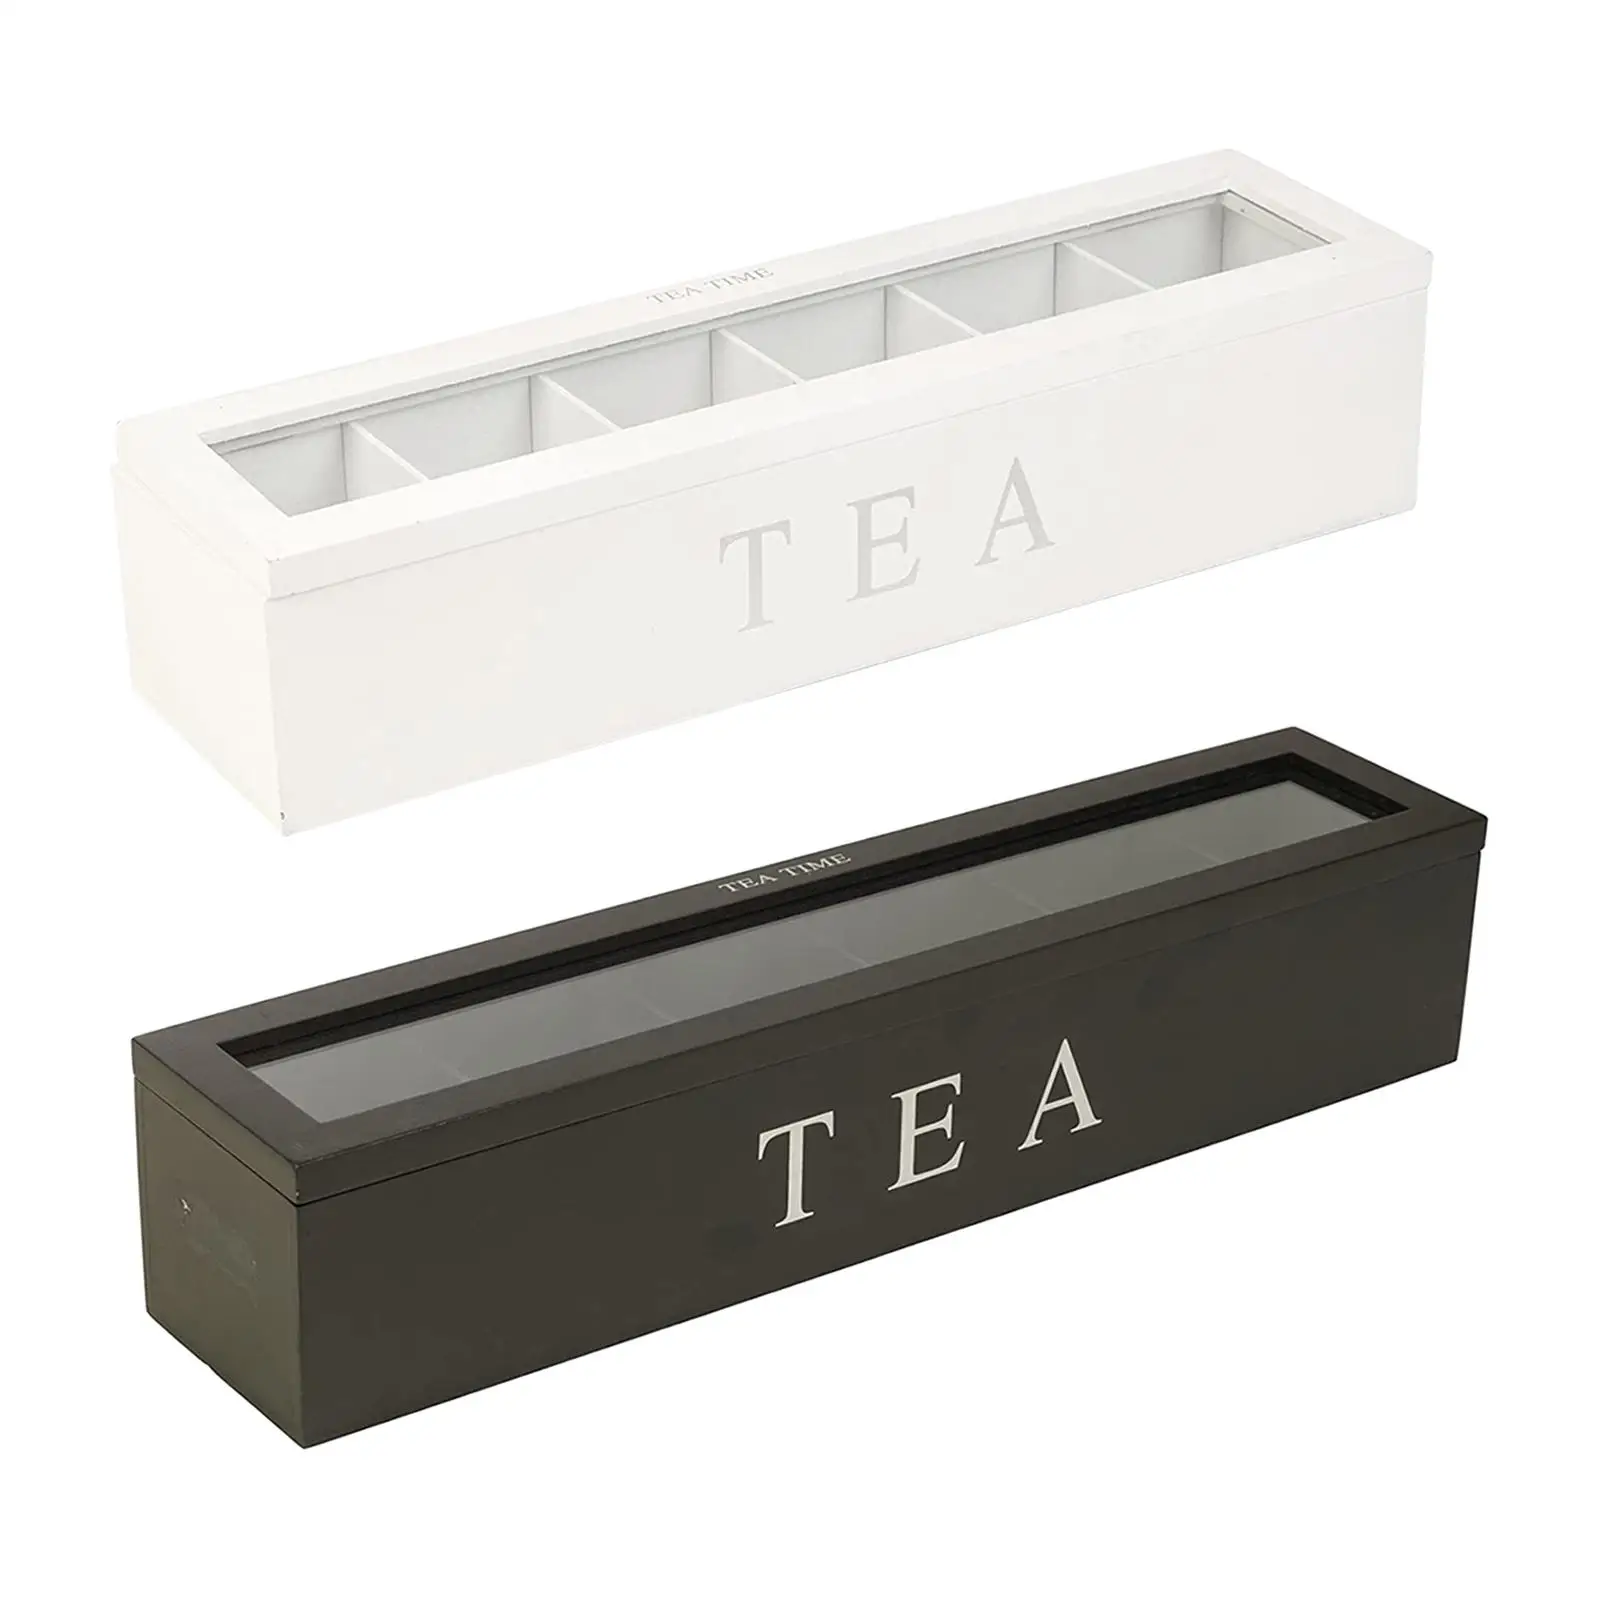 New Wooden Tea Box With Lid 6 Compartment Retro Style Coffee Tea Bag Storage Holder Organizer For Kitchen Cabinets Home Kitchen